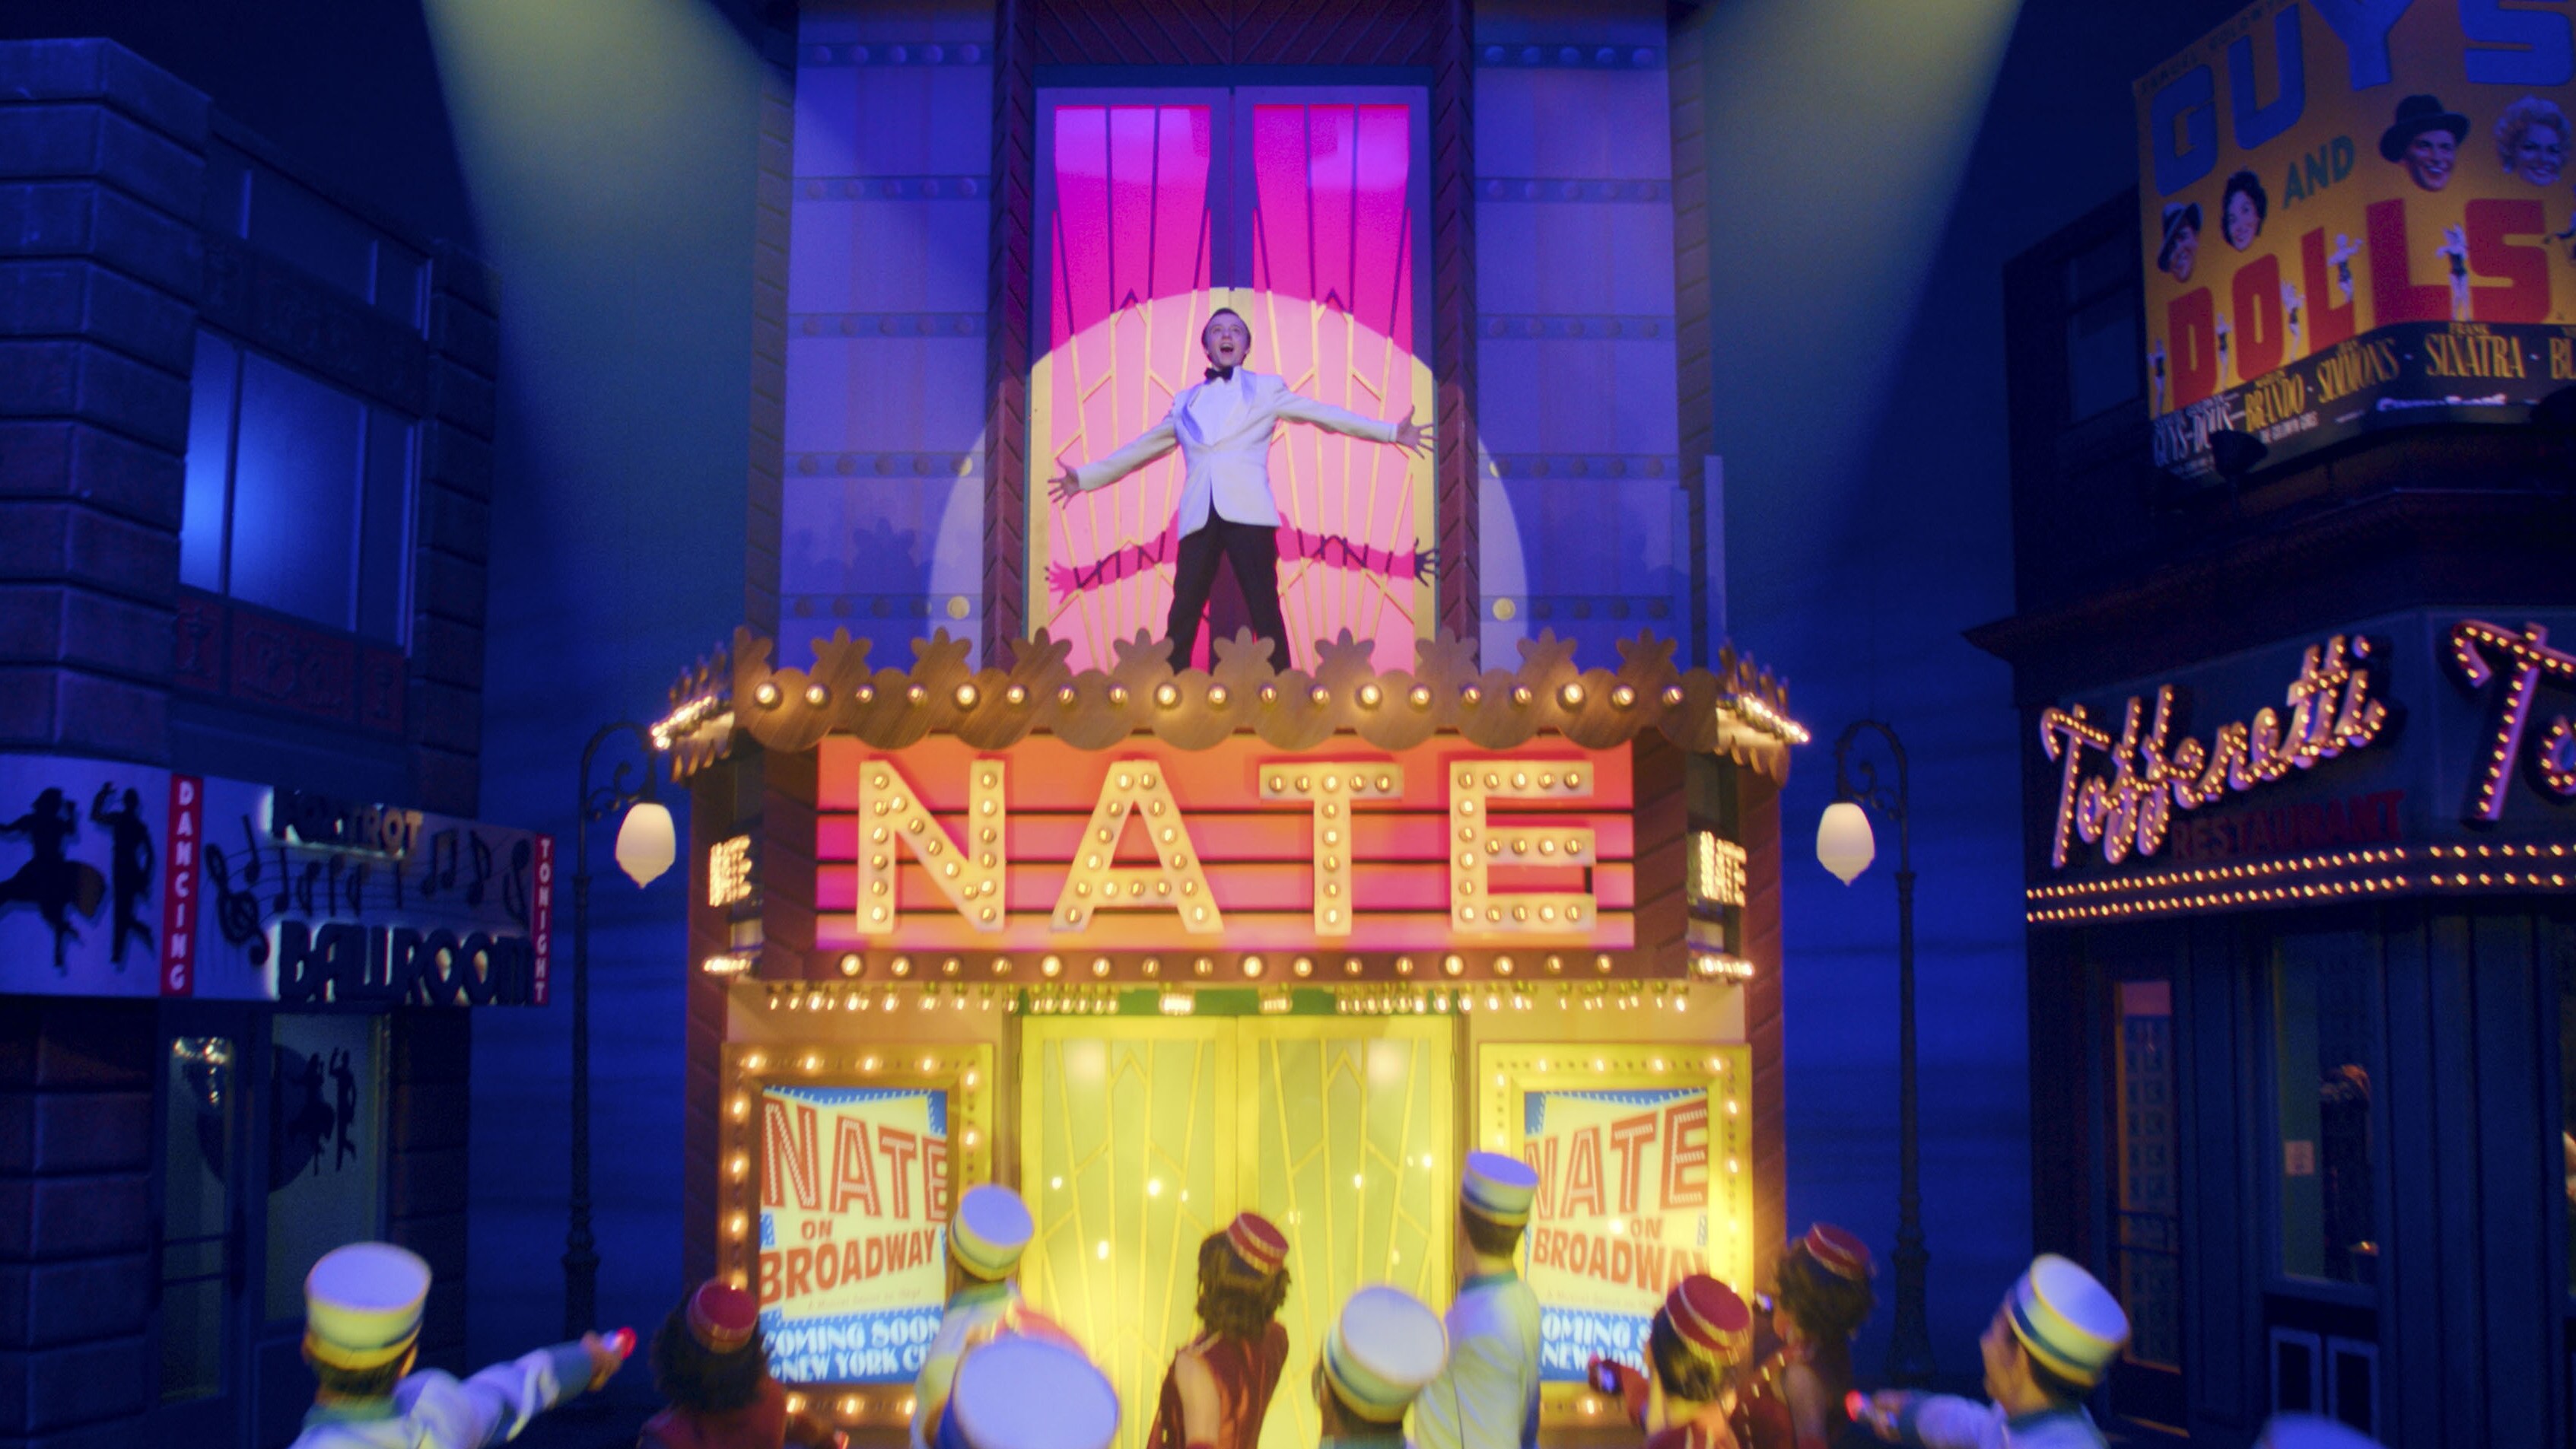 Rueby Wood as Nate in 20th Century Studios' BETTER NATE THAN EVER, exclusively on Disney+. Photo courtesy of 20th Century Studios. © 2022 Disney Enterprises, Inc. All Rights Reserved.